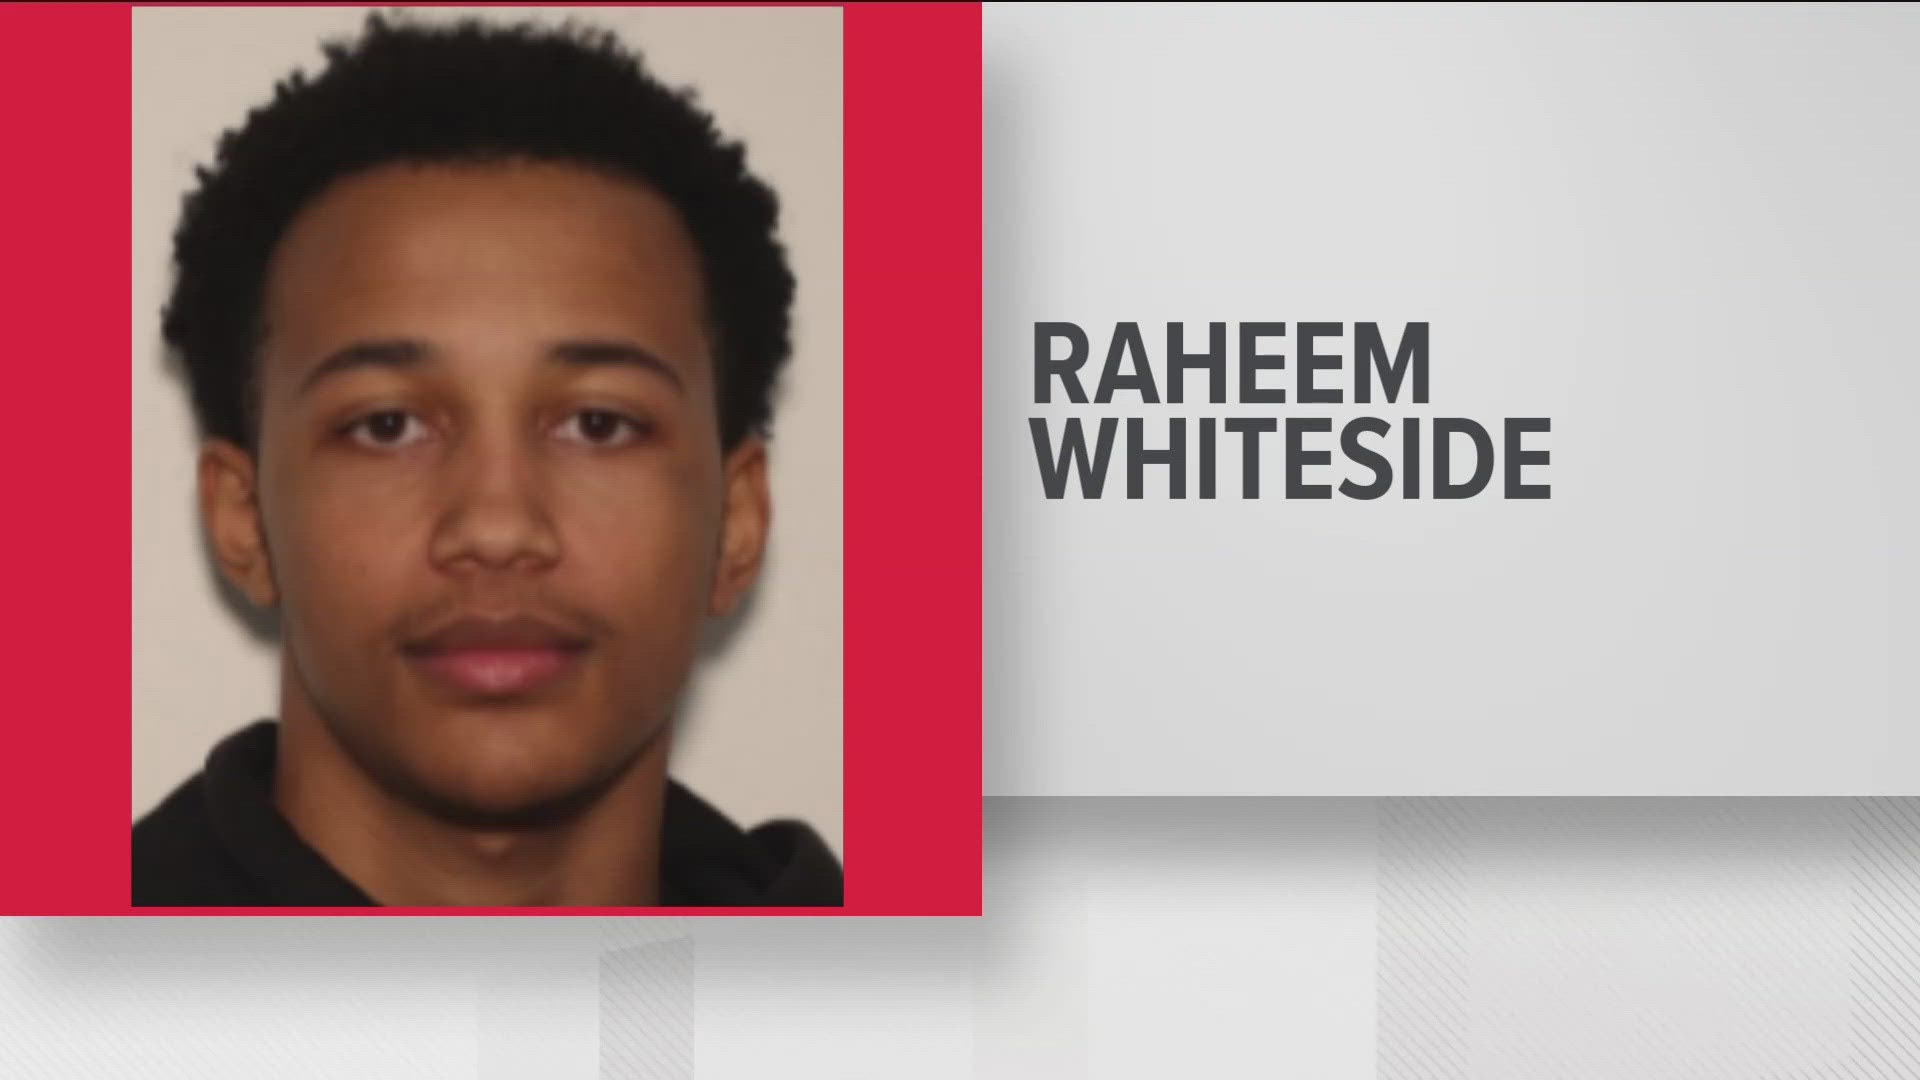 A 19-year-old is accused of killing another during a deadly shooting at an apartment complex this weekend, Gwinnett County Police said.